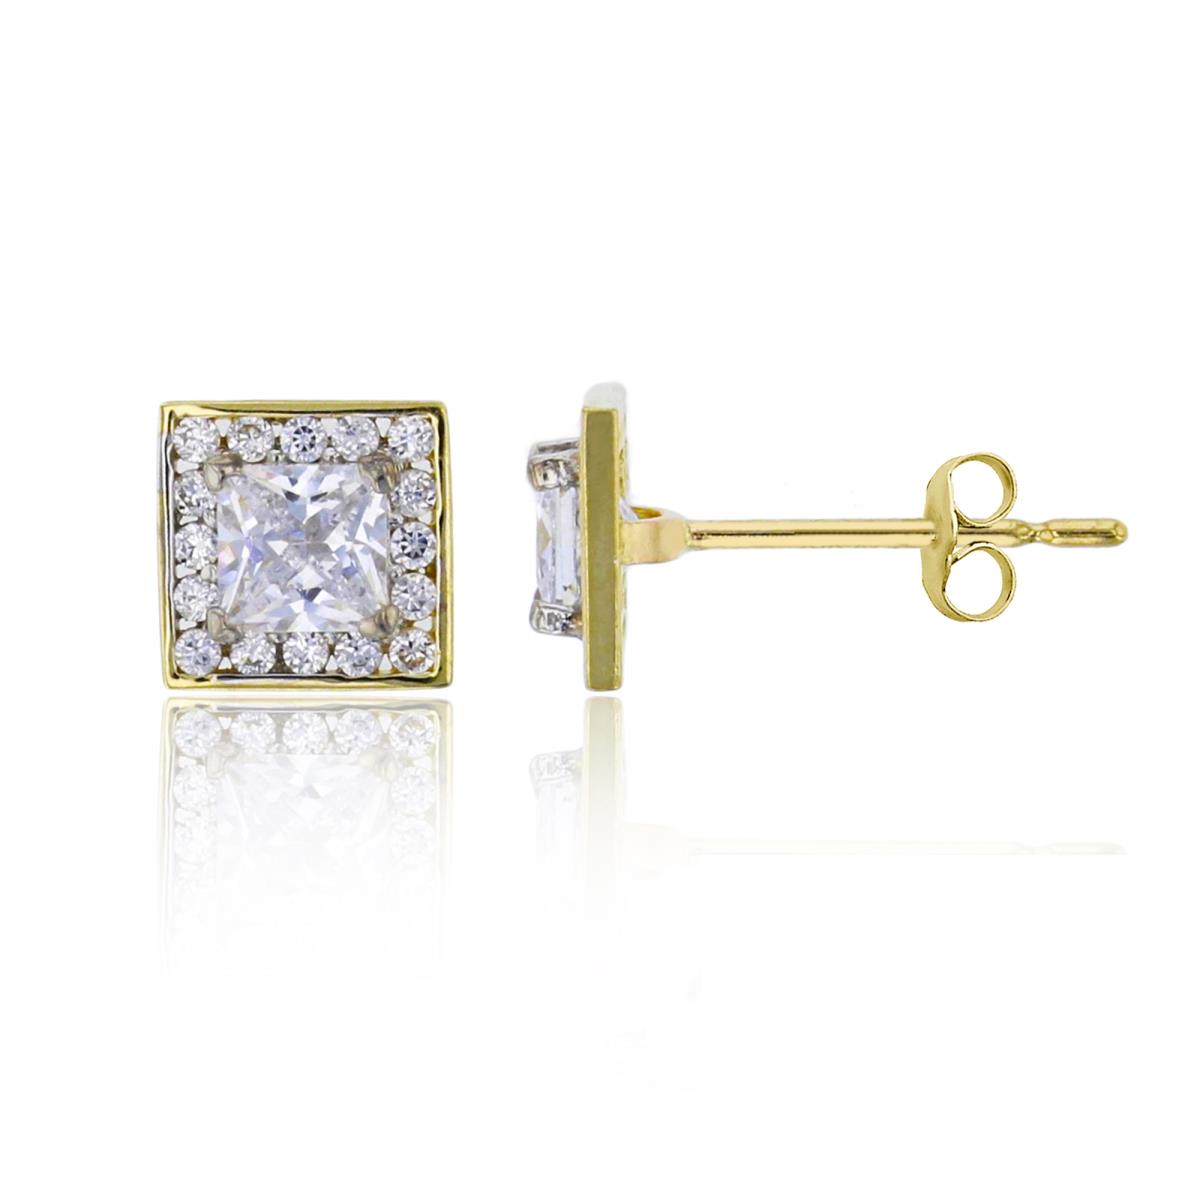 14K Two-Tone Gold 3.5mm Princess Cut Square Stud Earring with 14K Clutch